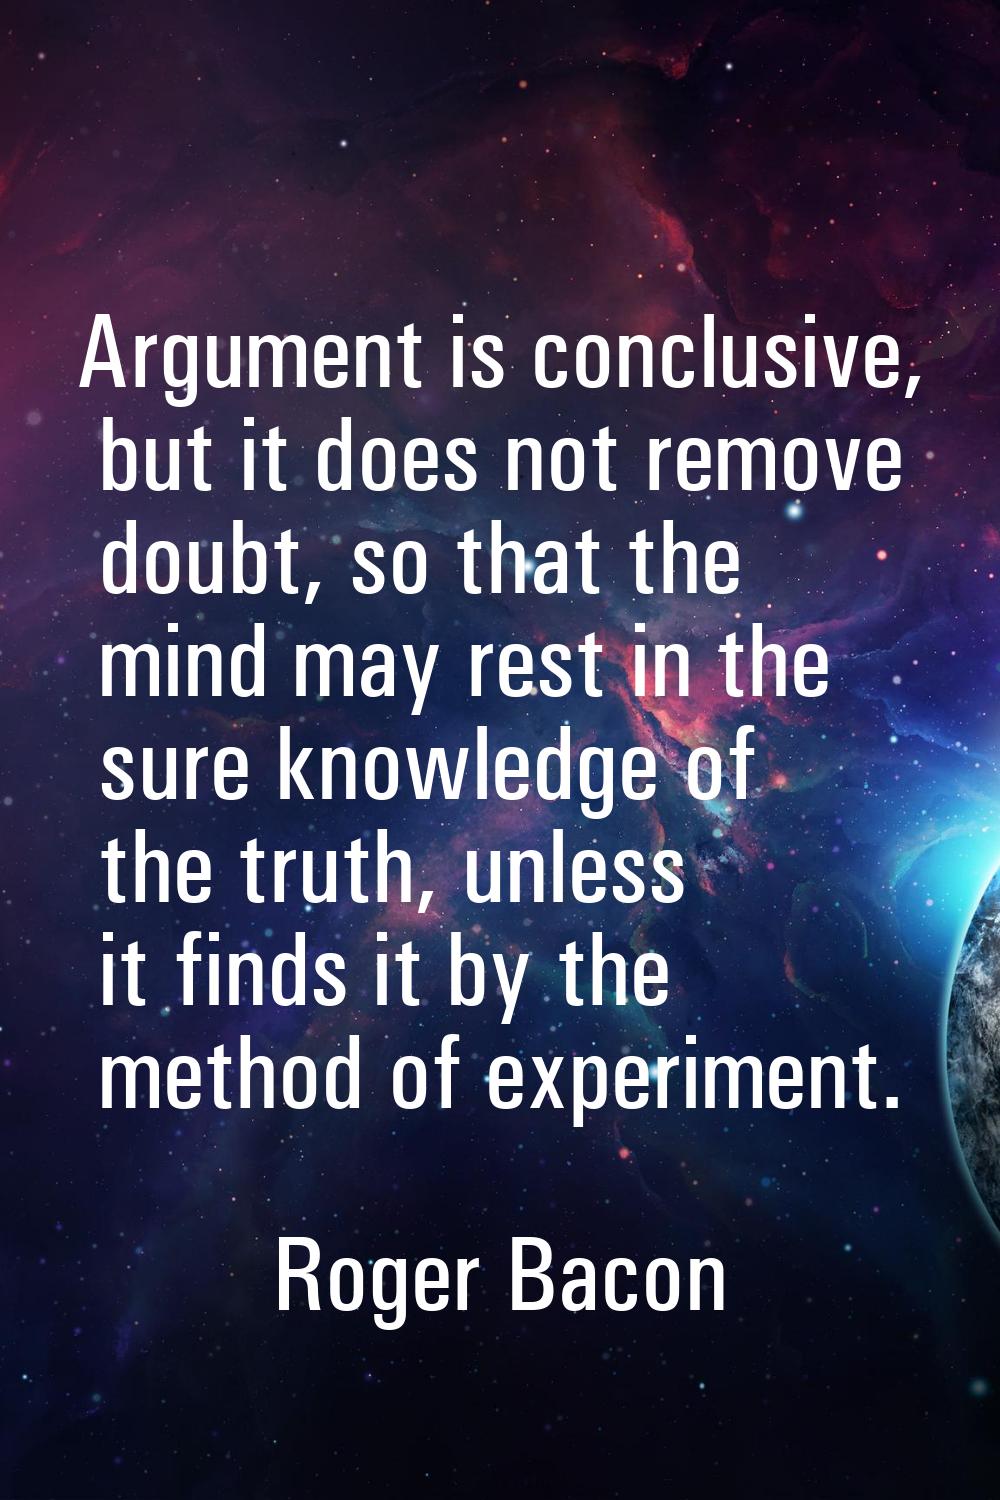 Argument is conclusive, but it does not remove doubt, so that the mind may rest in the sure knowled